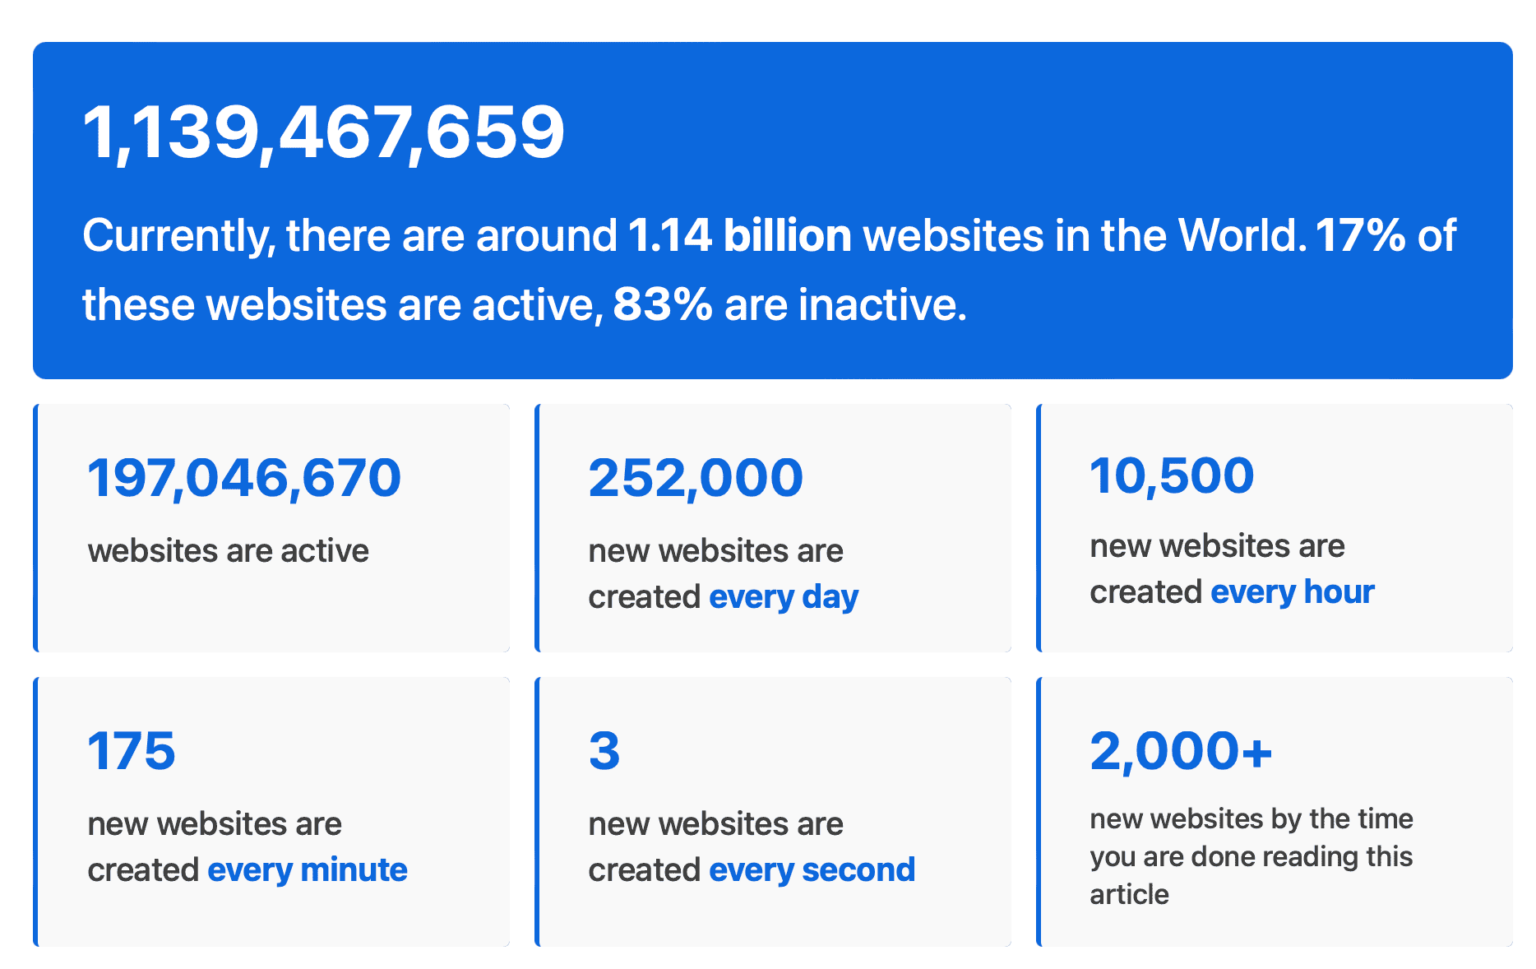 How Many Websites Are There in the World?